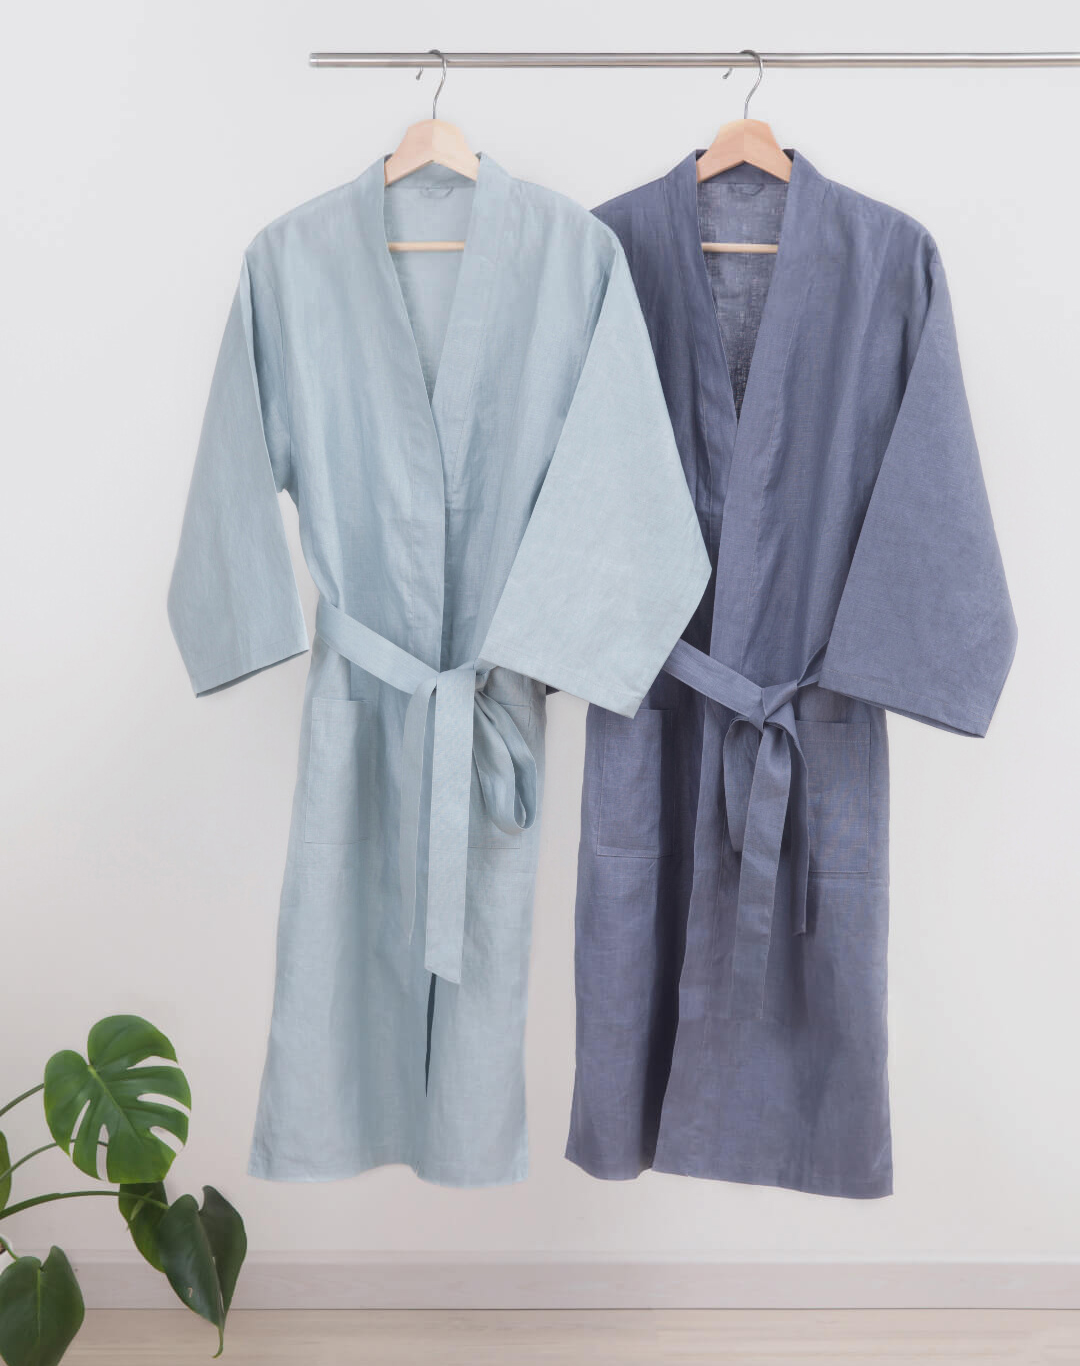 ZaxArt-Linen-Couple-Nightgown-Grey - ZY170908